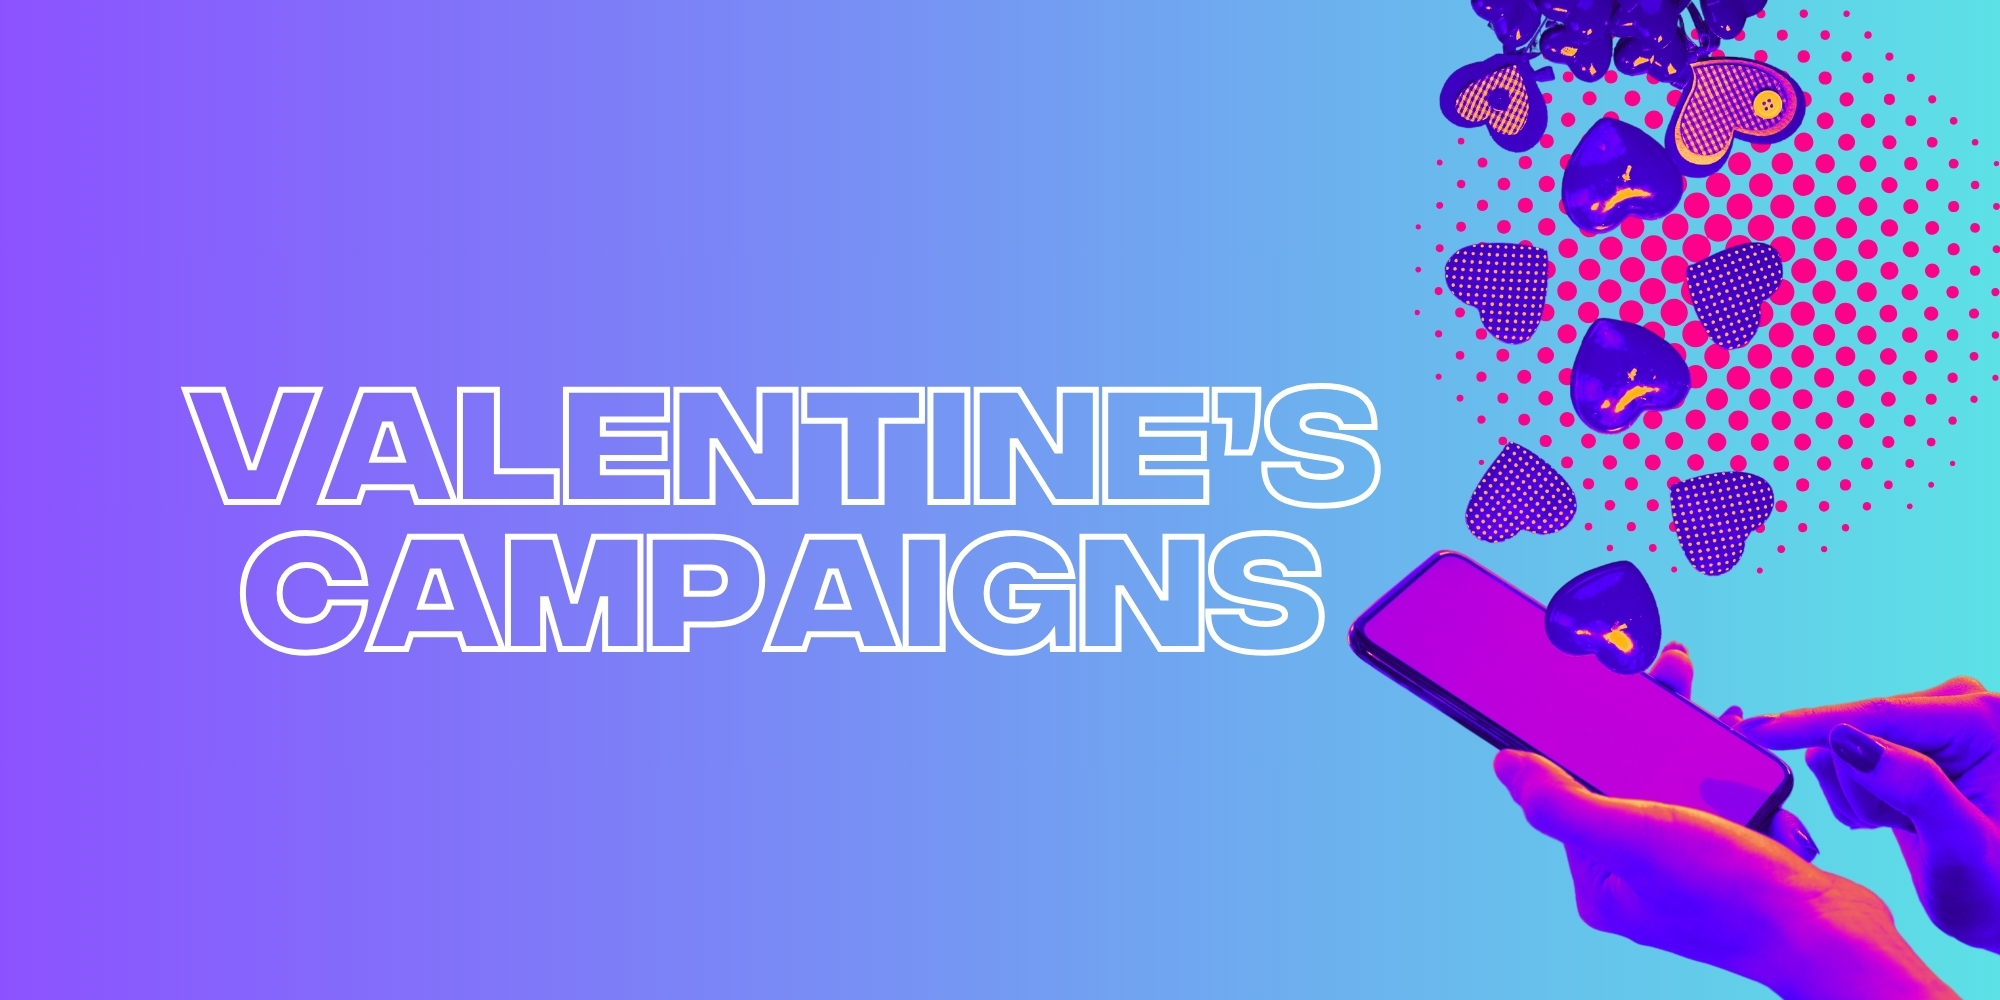 Influencer Marketing Campaign Examples for Valentines Day